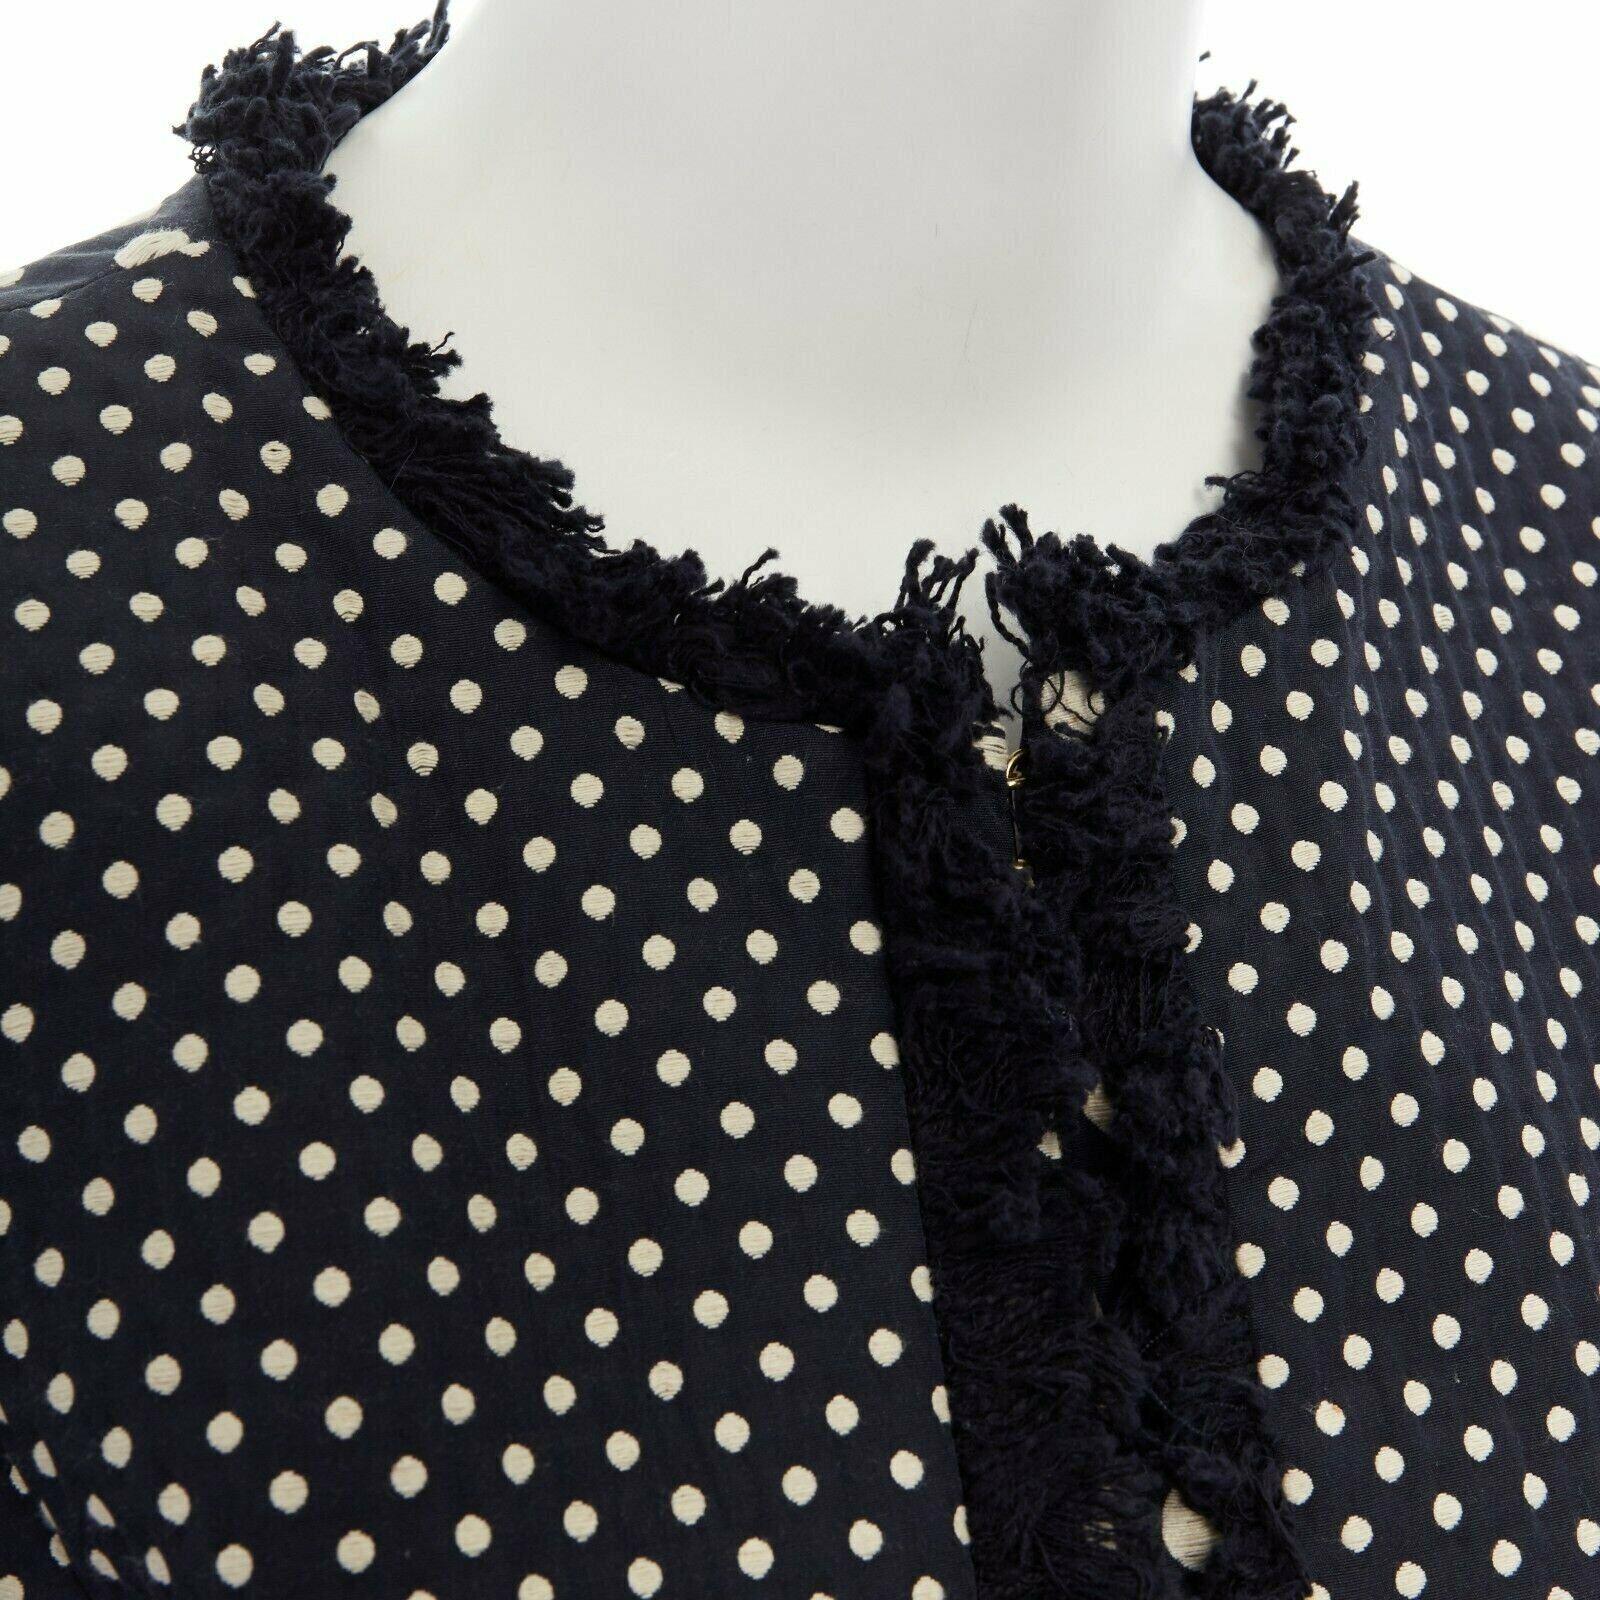 TORY BURCH navy blue white polka dot jacquard frayed trimmed coat US2 S
Reference: CC/SSLG00191
Brand: Tory Burch
Material: Cotton
Color: Blue
Pattern: Polka Dot
Extra Details: Cotton, polyester. Navy blue with white polka dot jacquard. Collarless.